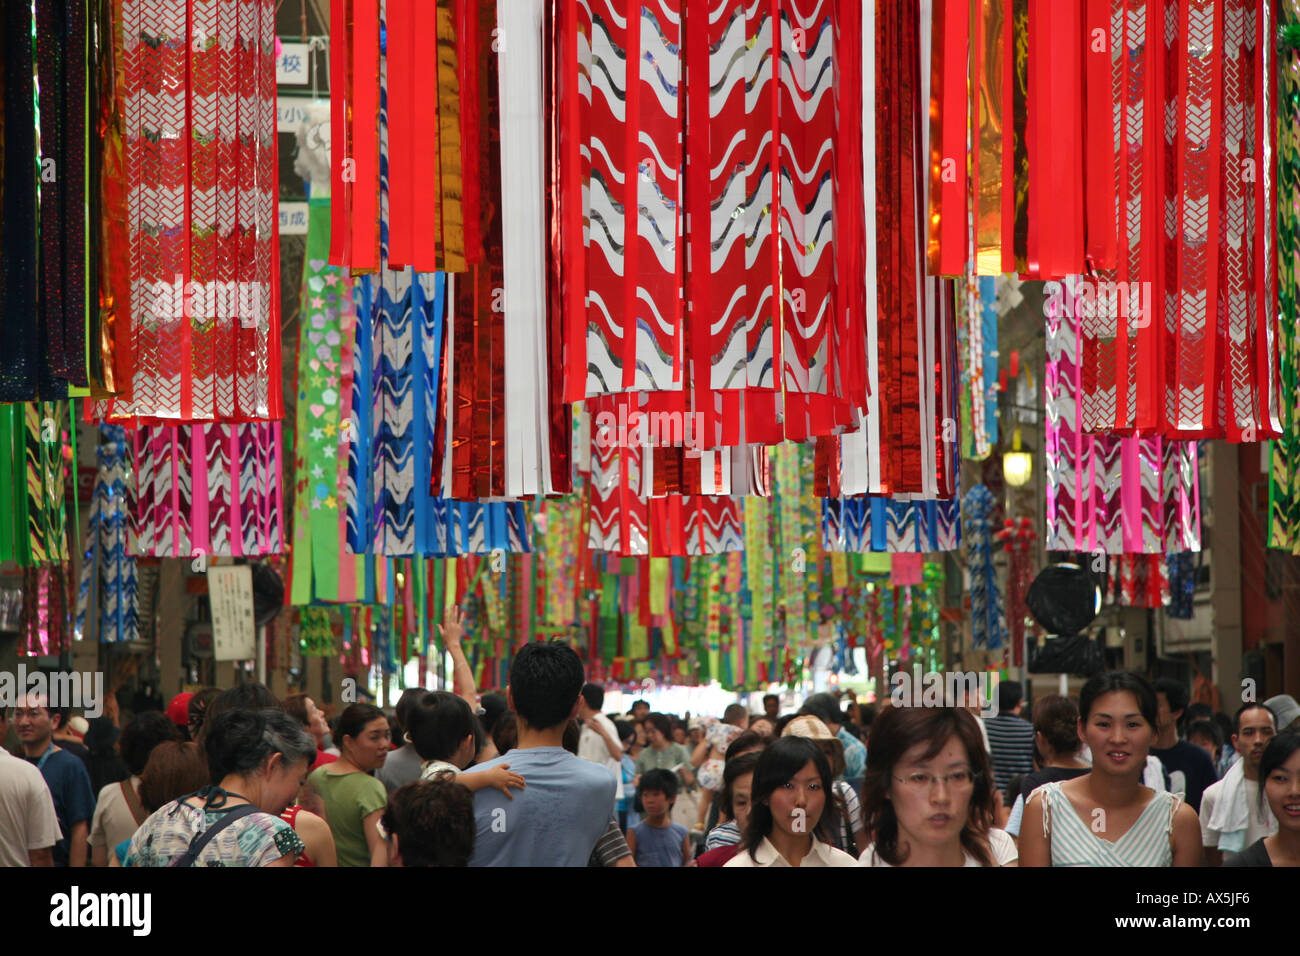 Tanabata summer festival streamers in Japan Stock Photo